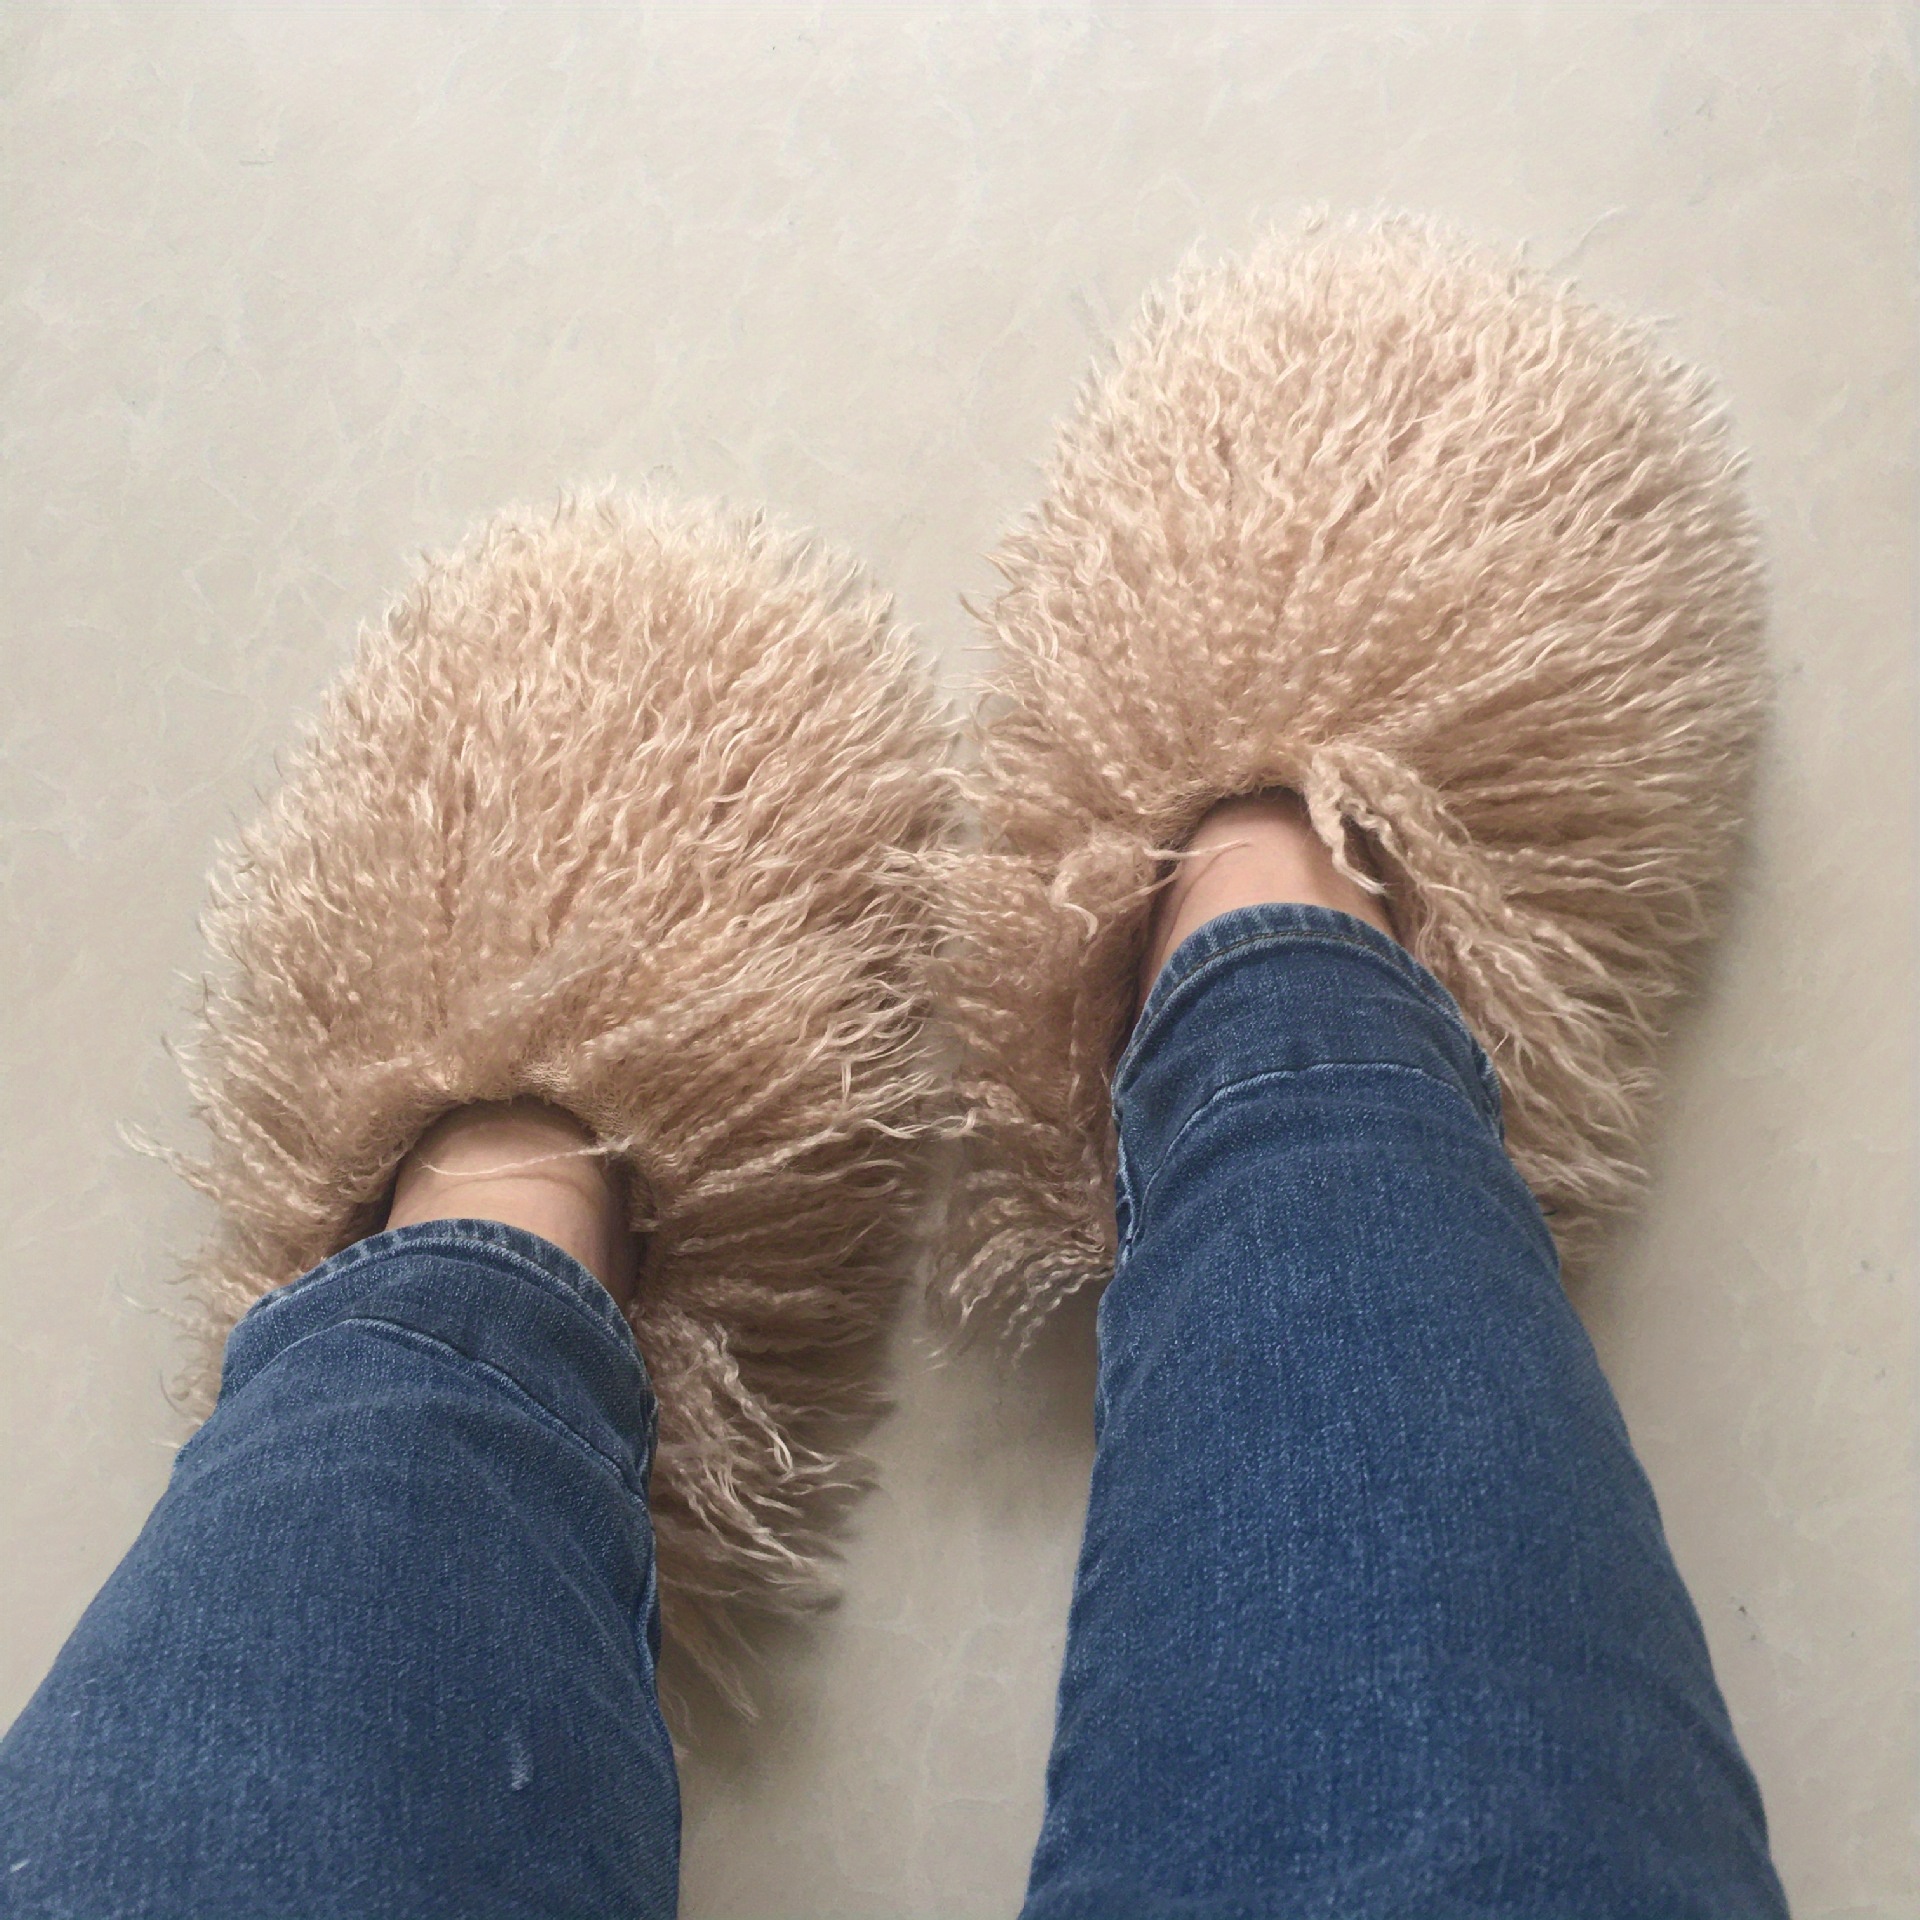 Women's Solid Color Faux Fur Slippers, Casual Slip On Flat